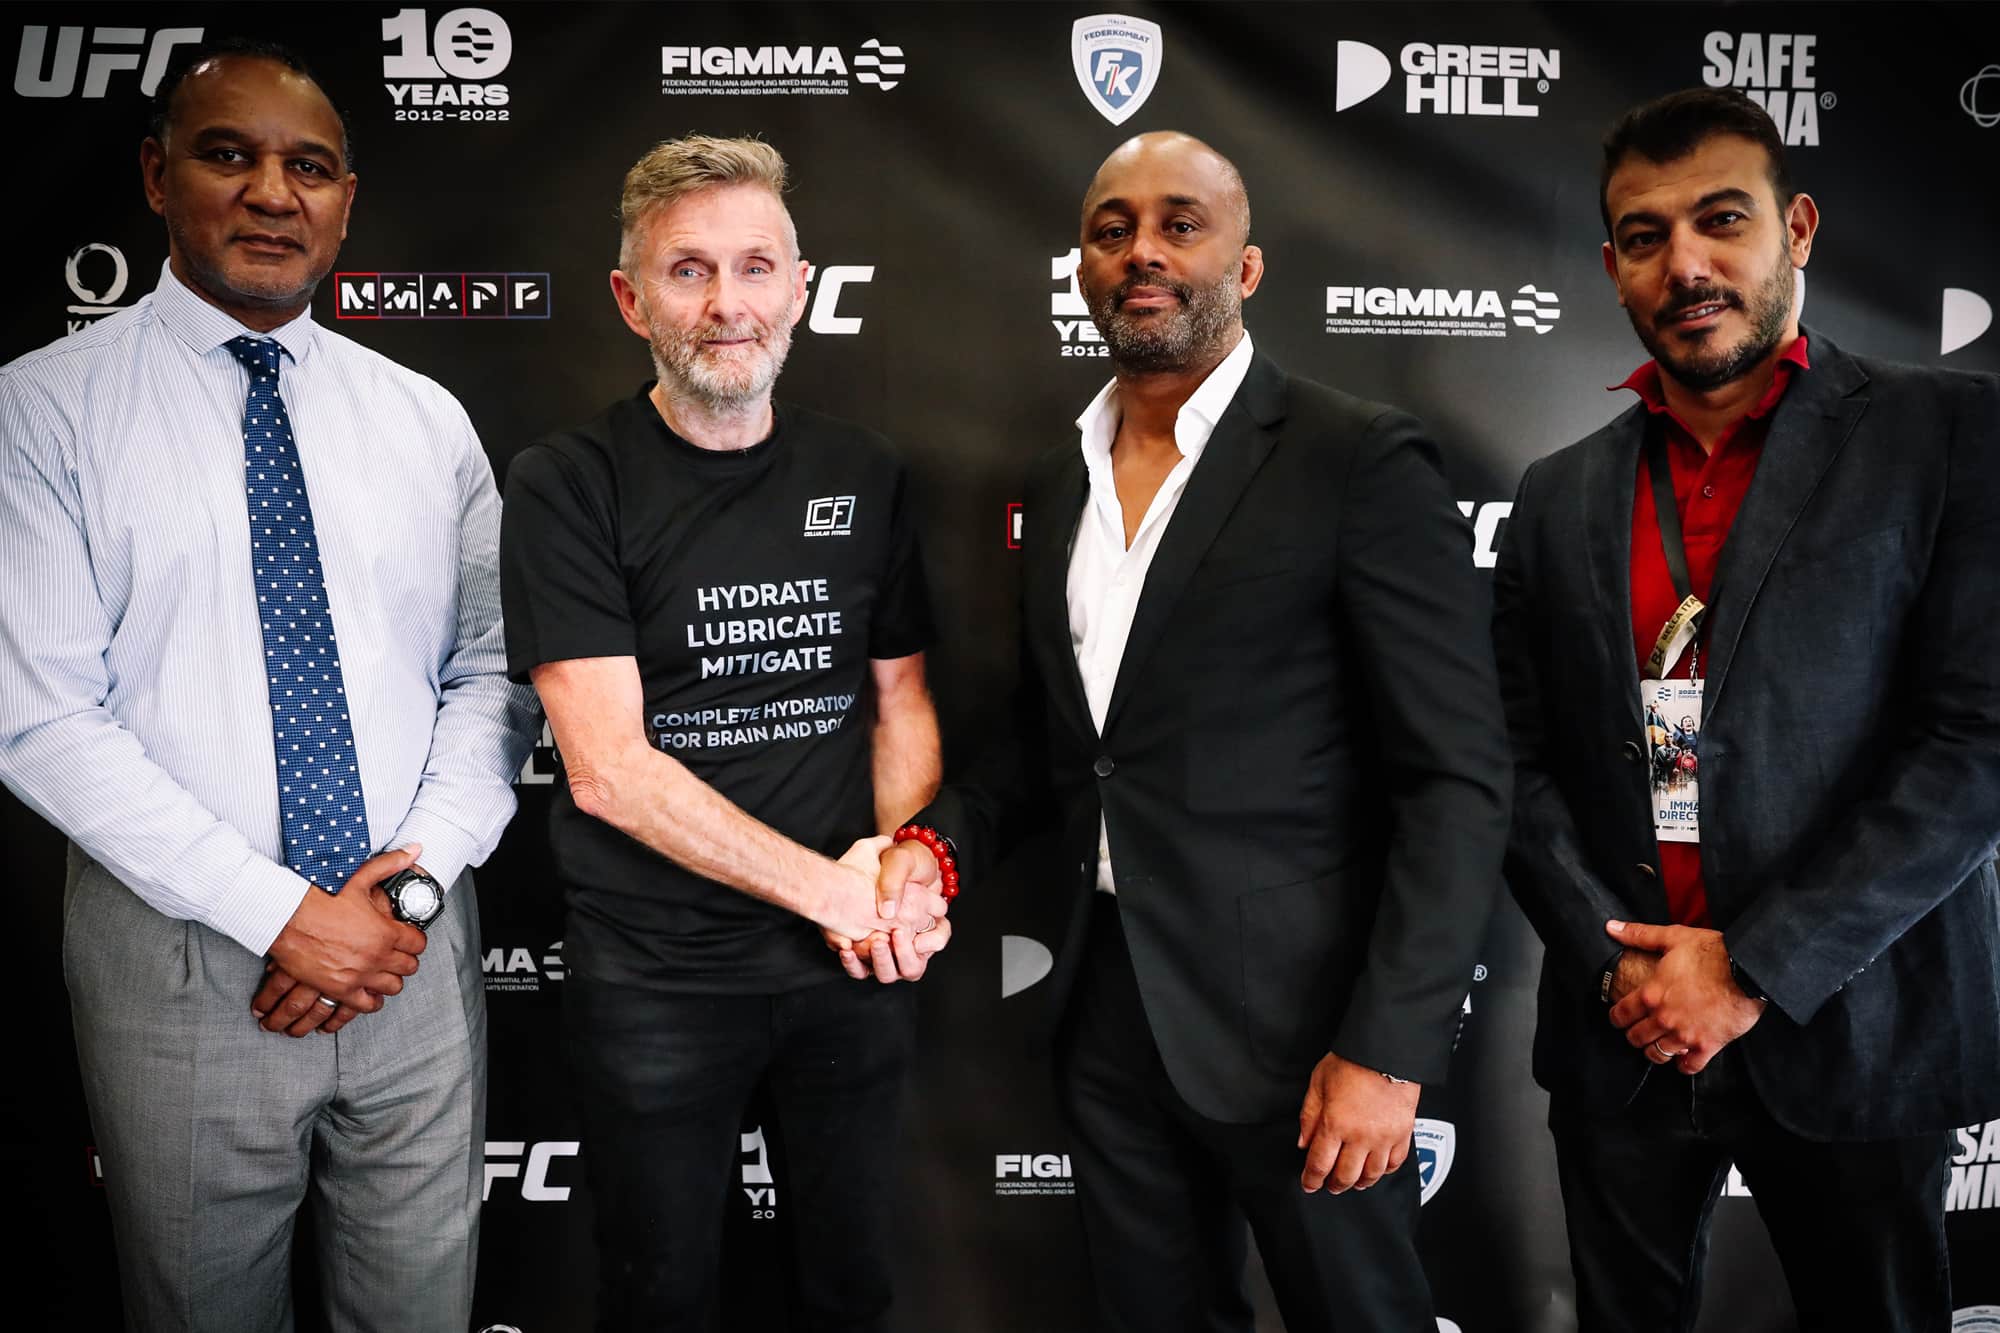 IMMAF partners with Cellular FitnessTM to boost athlete health and performance through hydration